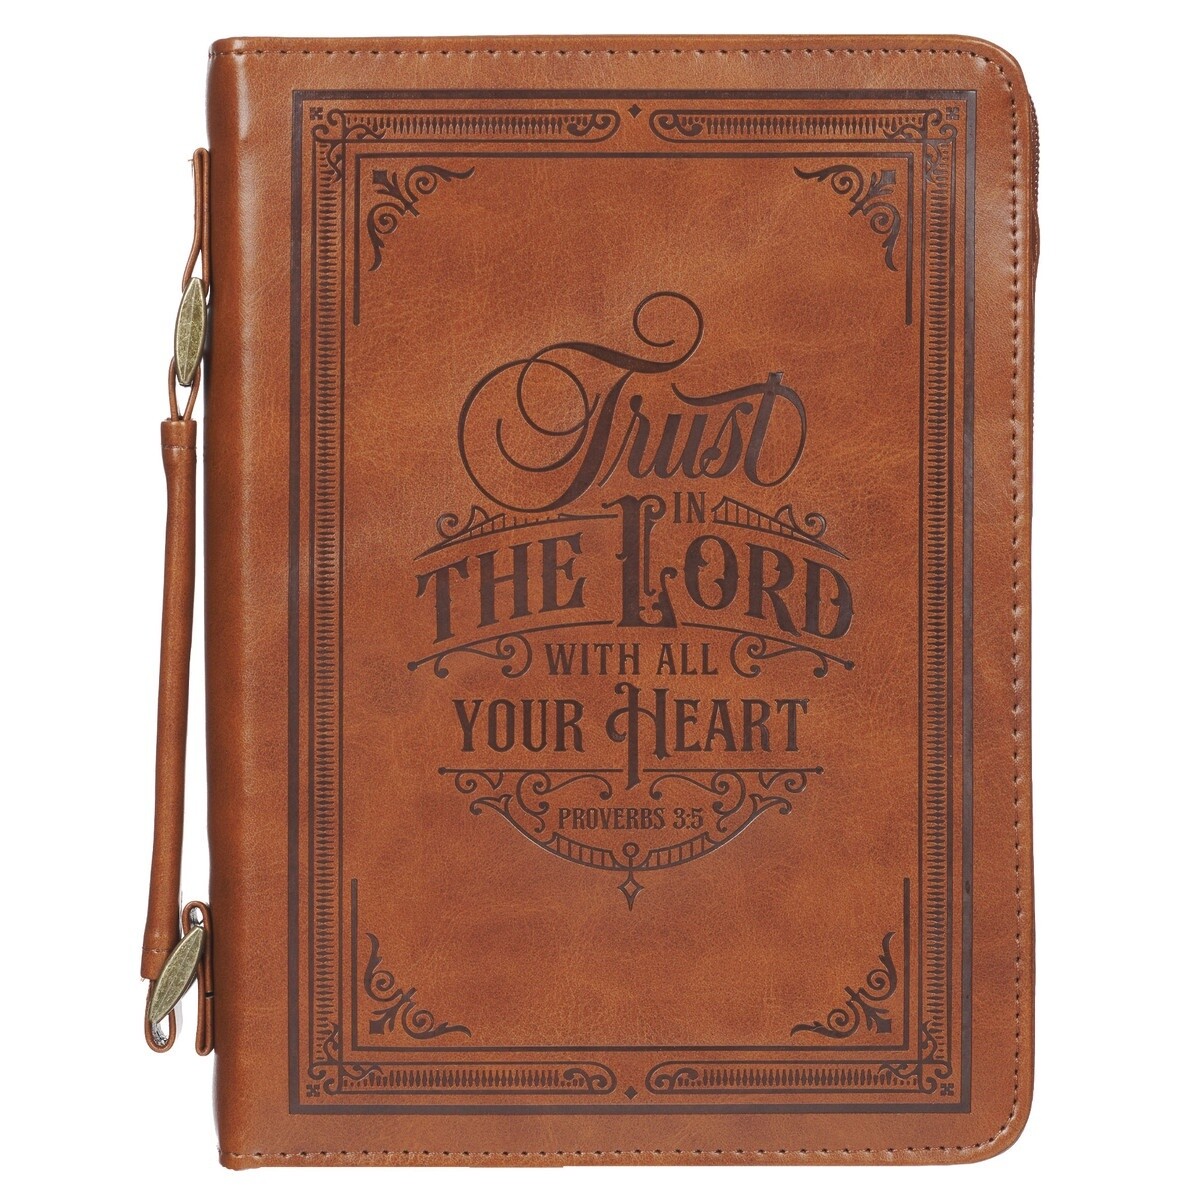 Trust in the Lord Honey-brown Faux Leather Classic Bible Cover - Proverbs 3:5, Size: Large